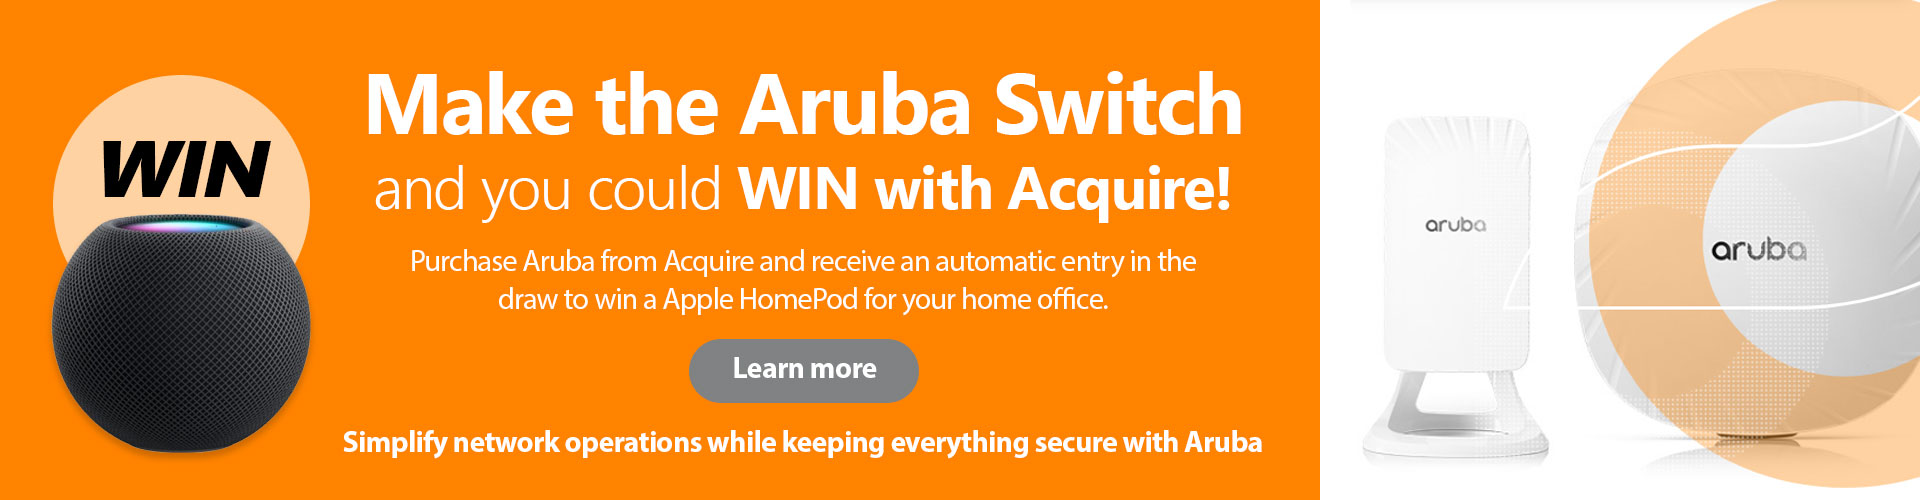 Make the Aruba switch and you could Win with Acquire!